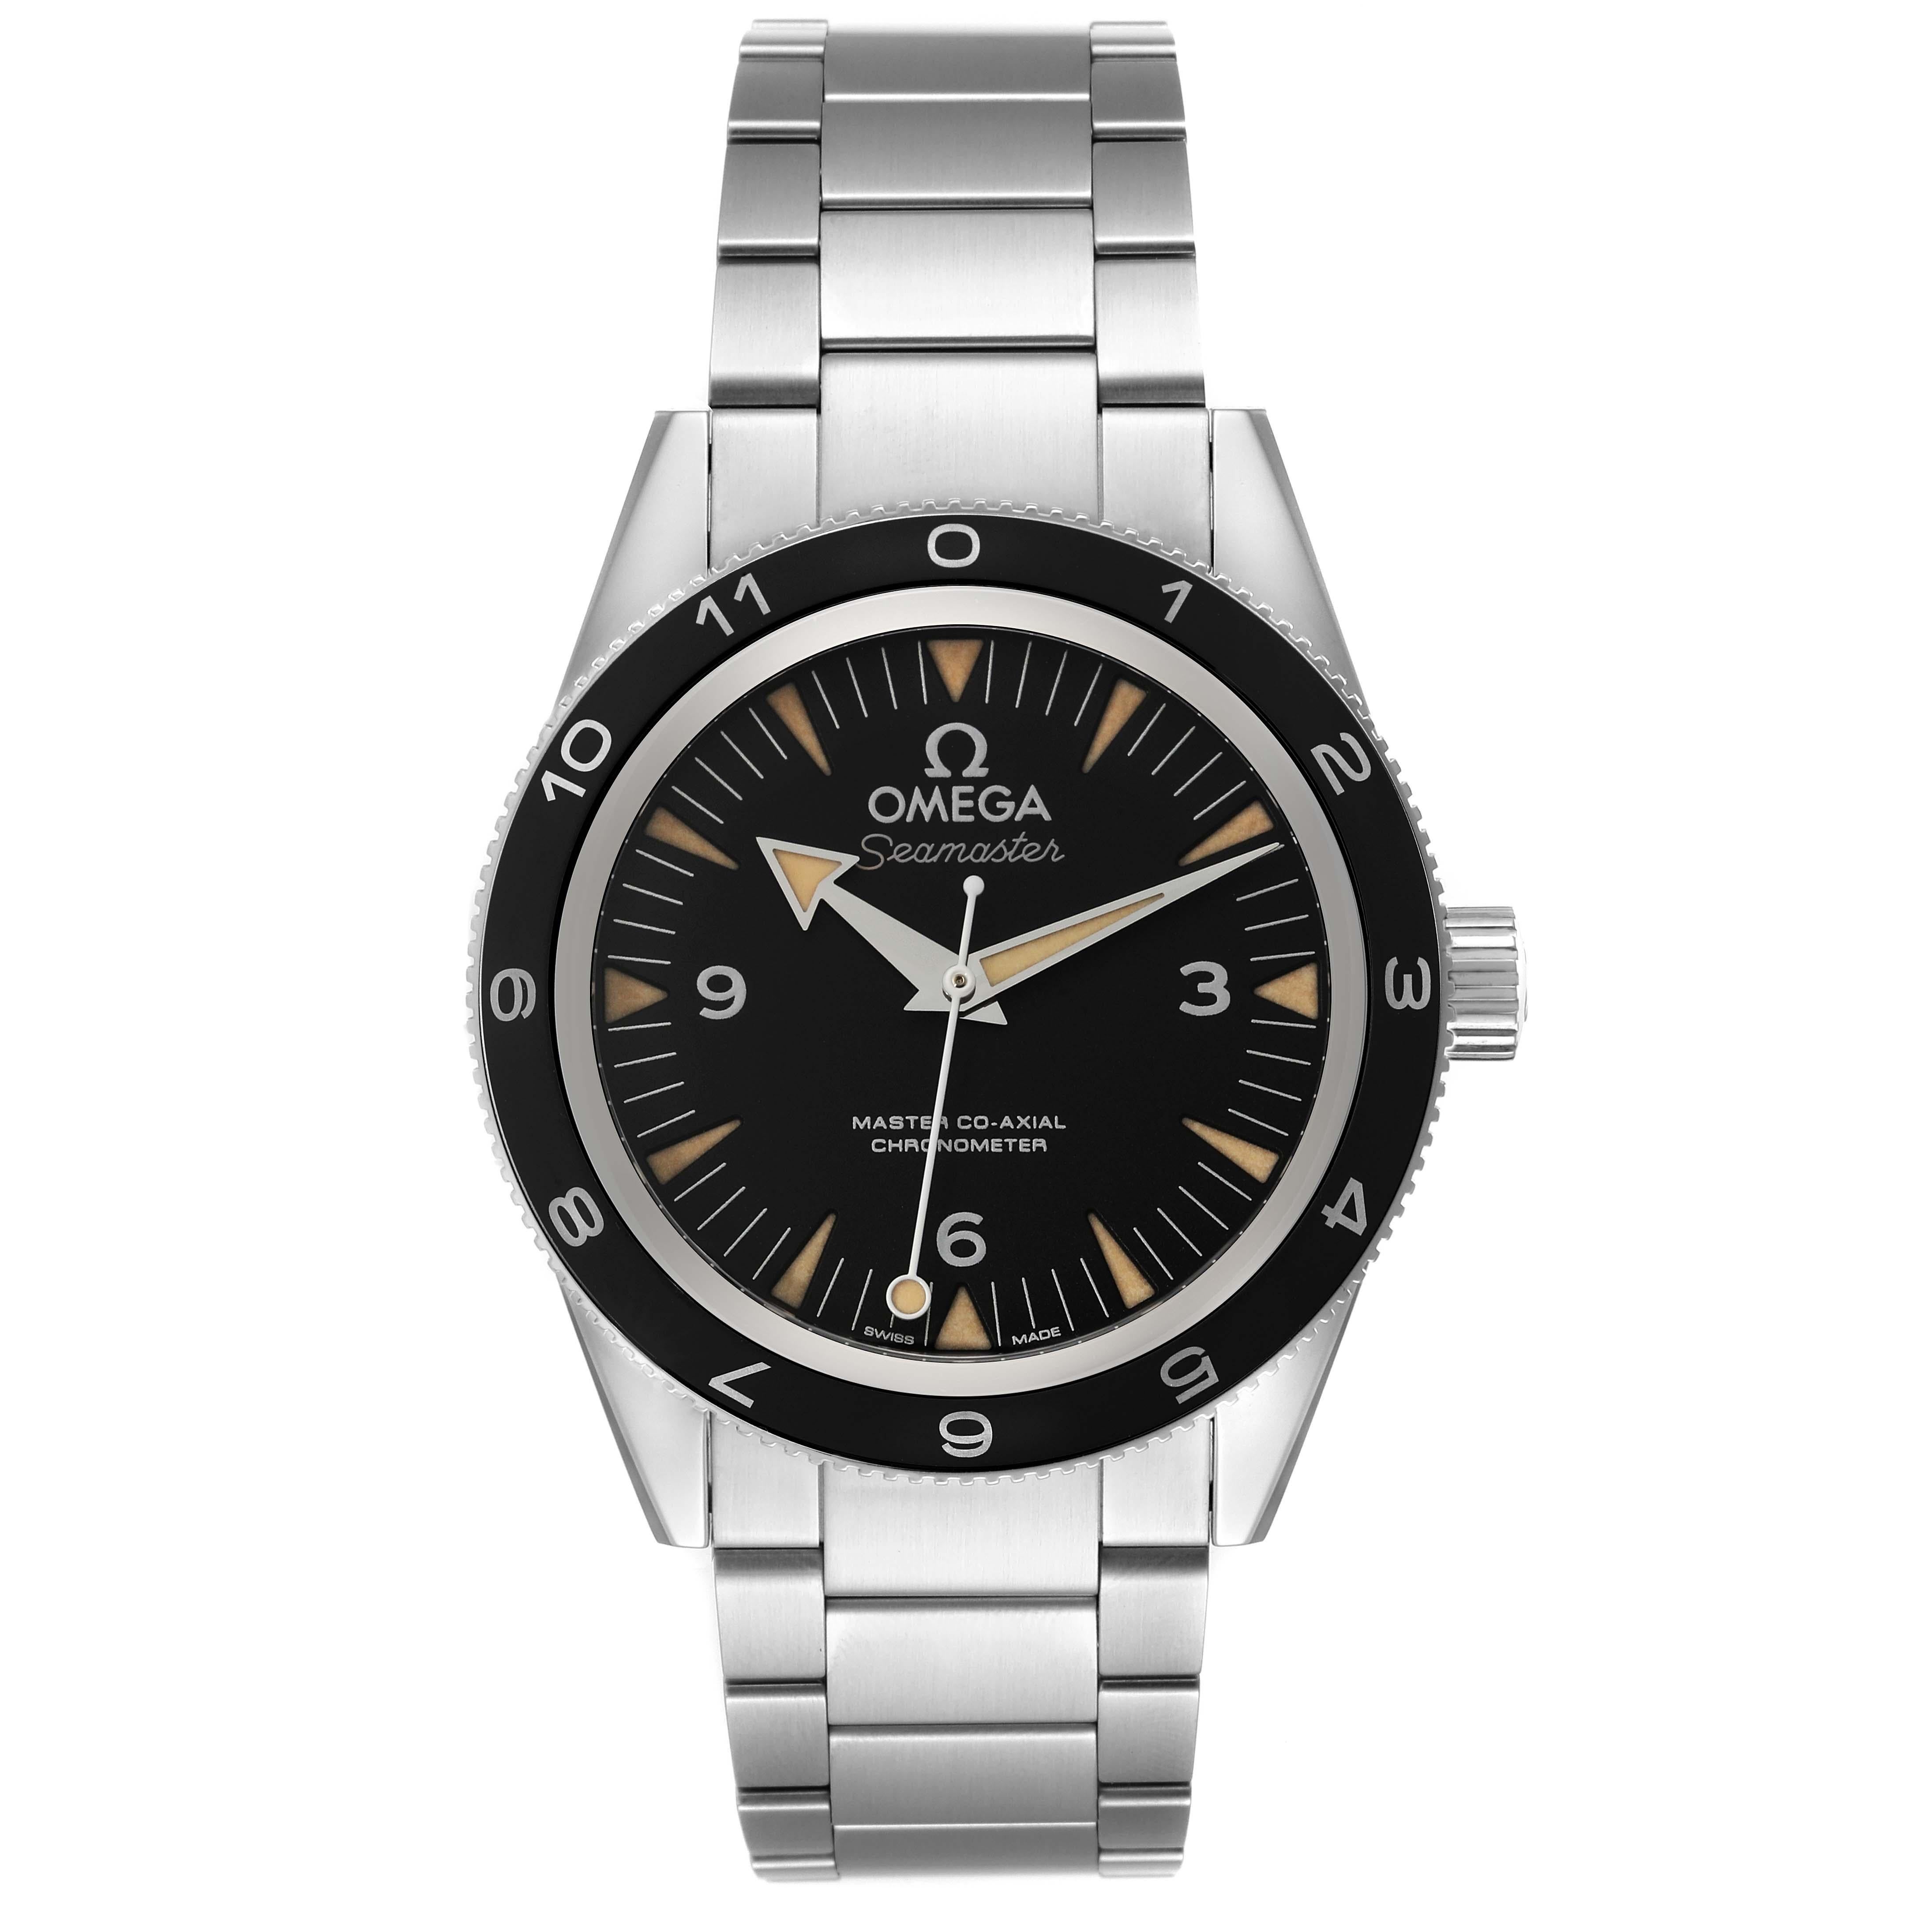 Omega Seamaster 300 Spectre LE Steel Mens Watch 233.32.41.21.01.001 Box Card. Automatic self-winding movement with Co-Axial escapement. Resistant to magnetic fields greater than 15,000 gauss. Free sprung-balance with silicon balance spring, two